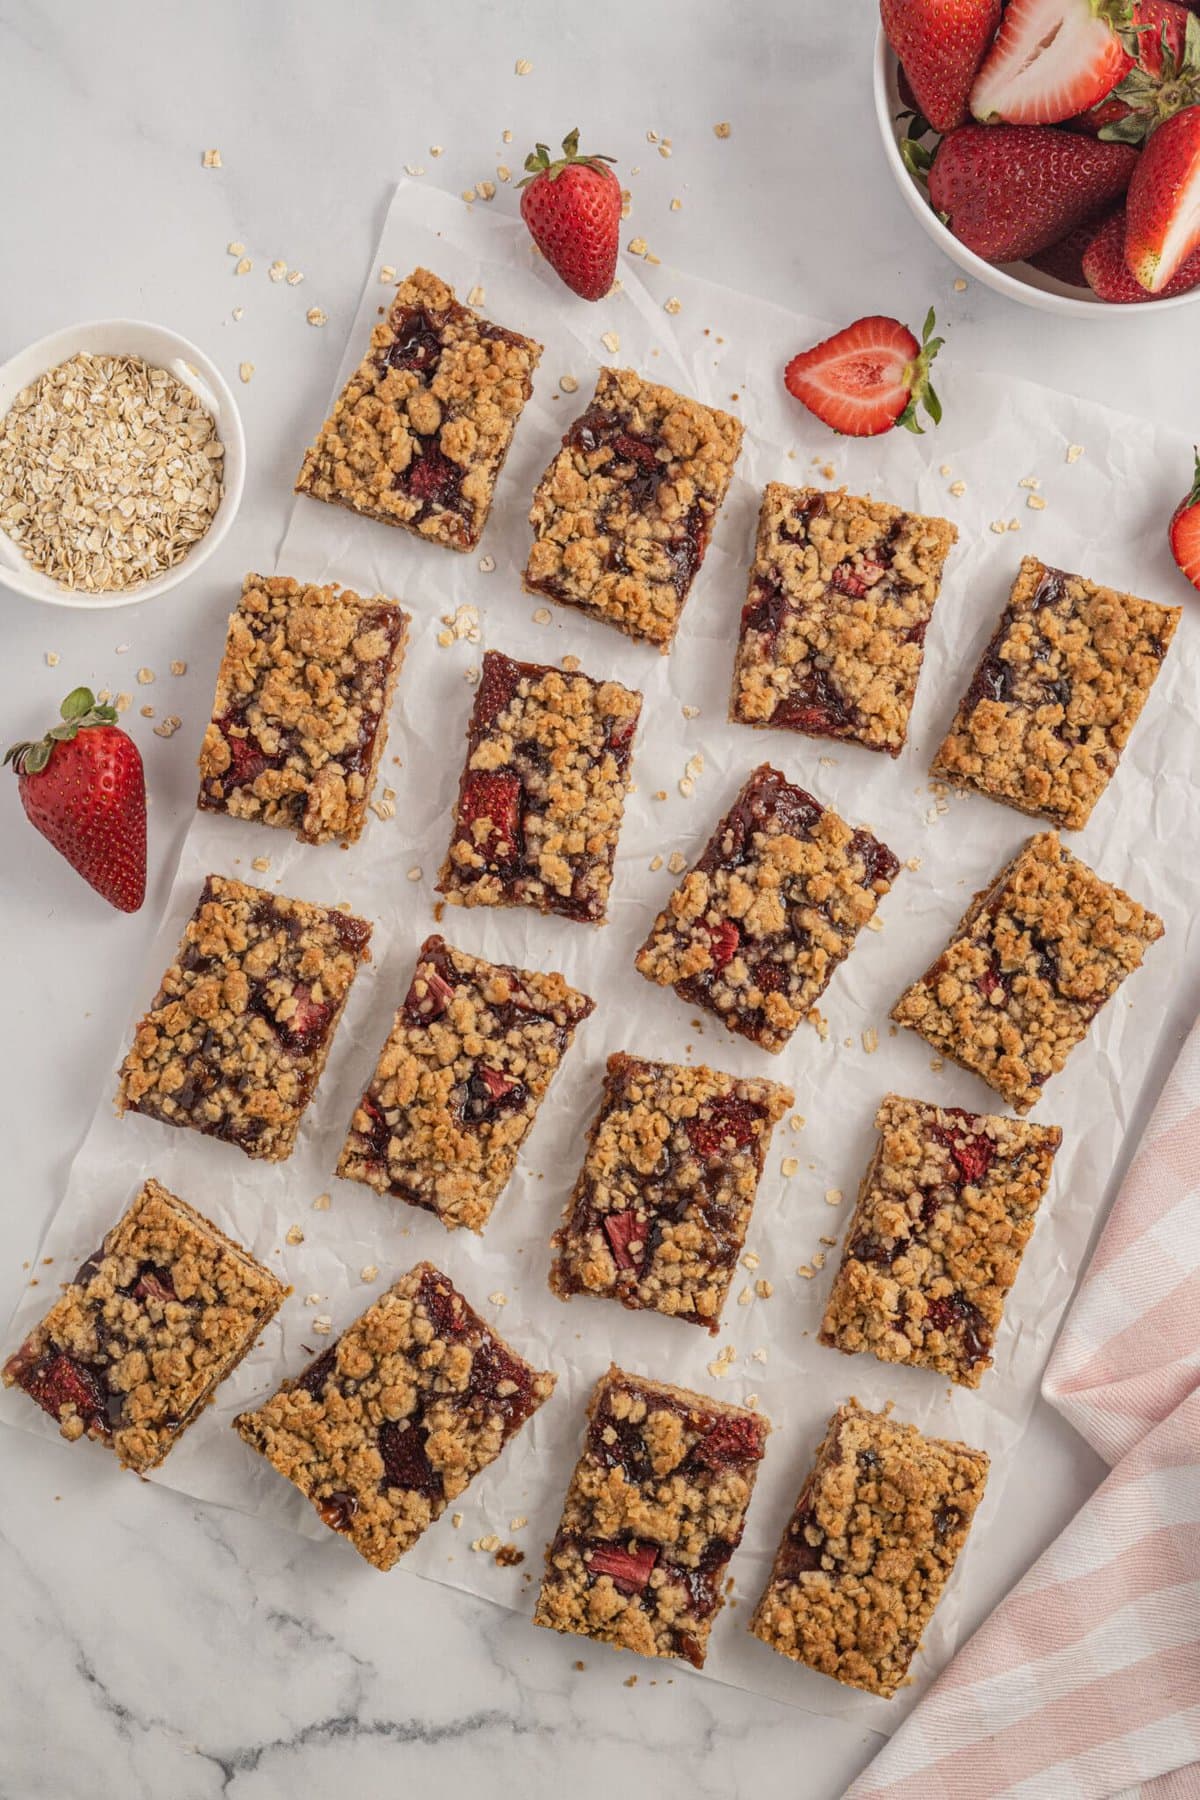 Strawberry Oatmeal Bars cut into squares.